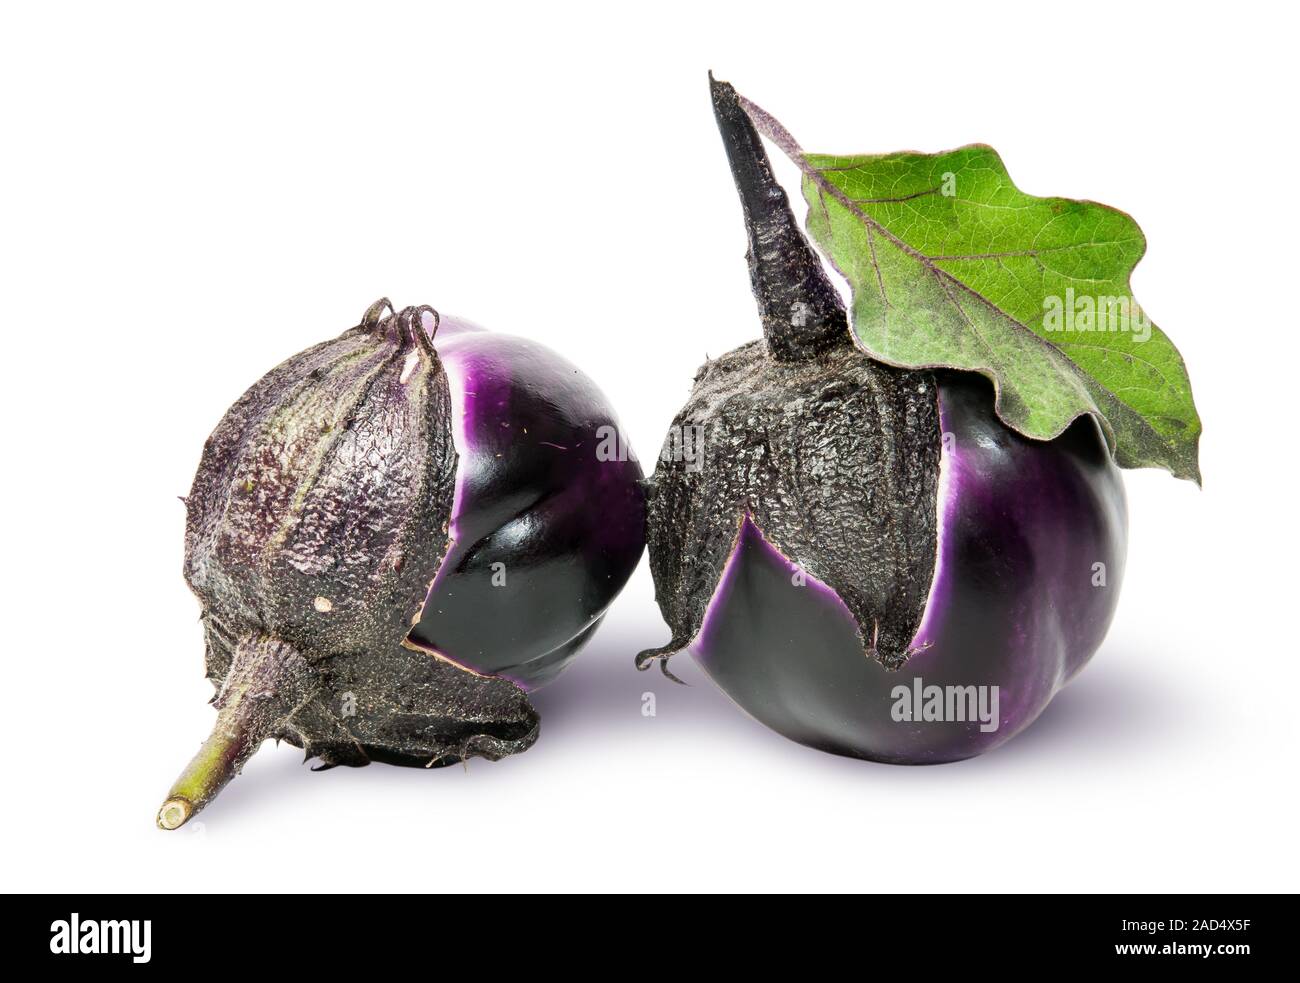 Two round ripe eggplant with green leaf rotated Stock Photo